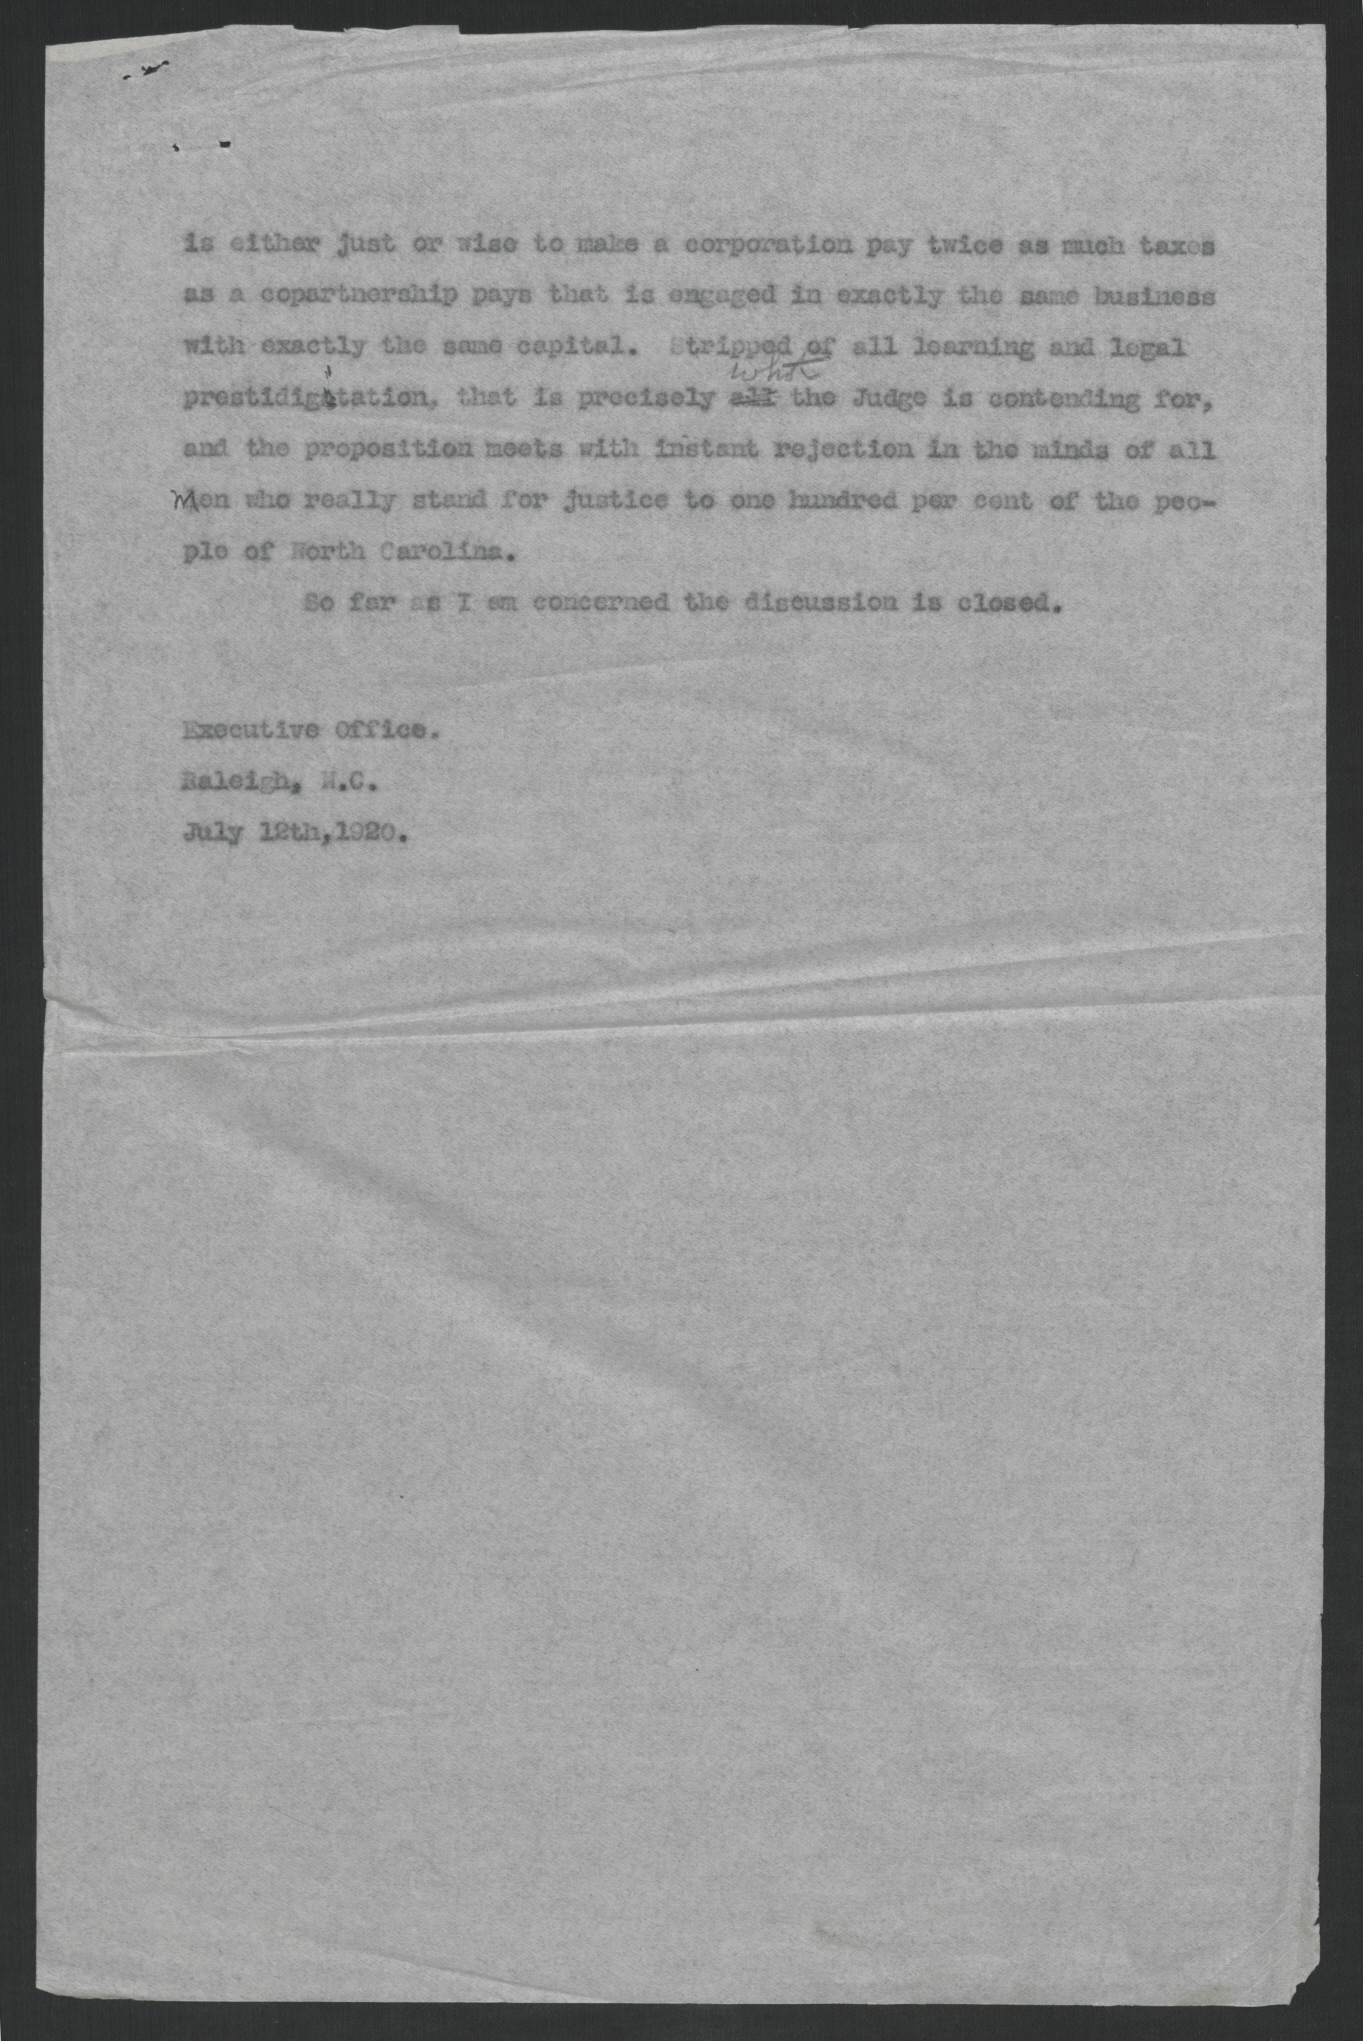 Governor Thomas W. Bickett's Response to Criticism by Walter M. Clark, July 12, 1920, page 2